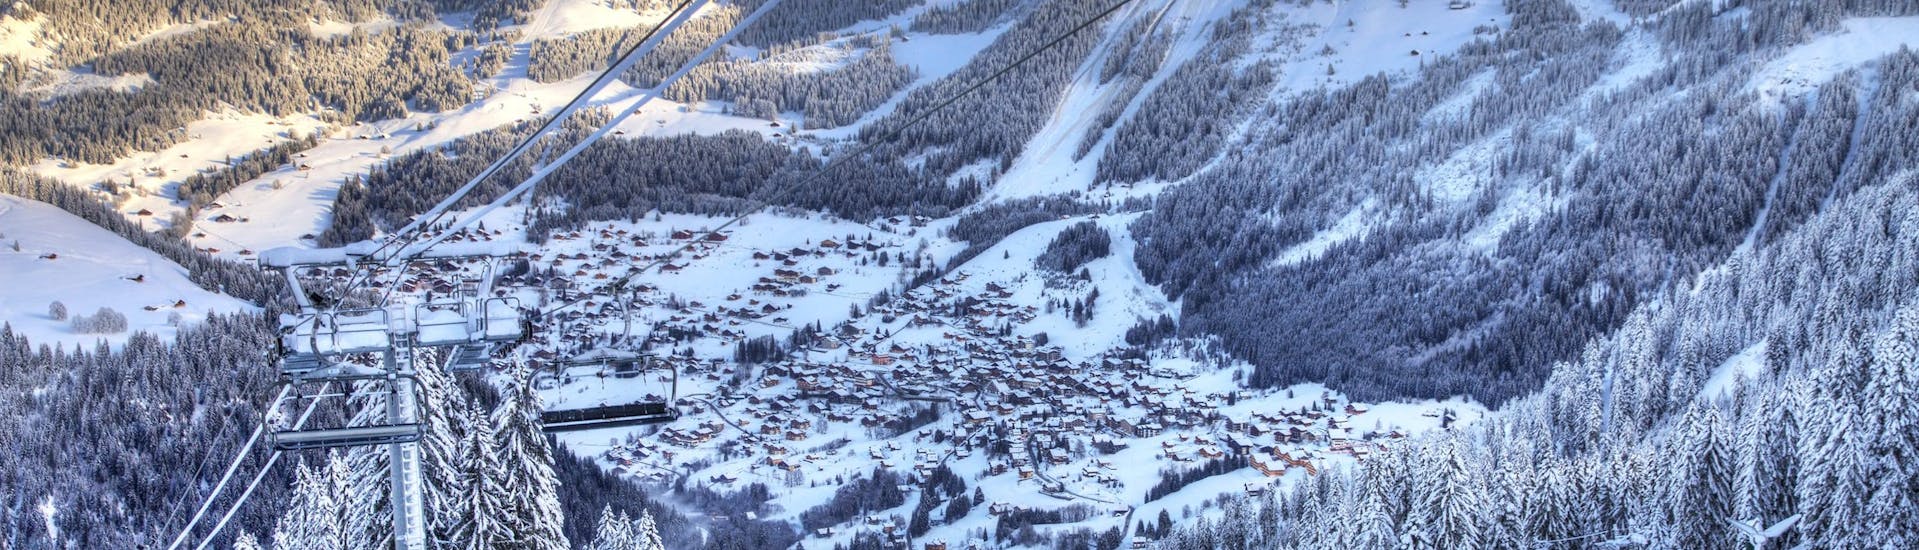 View of the French ski resort of Chatel with its slopes where local ski schools offer a wide range of ski lessons for those who want to learn to ski.